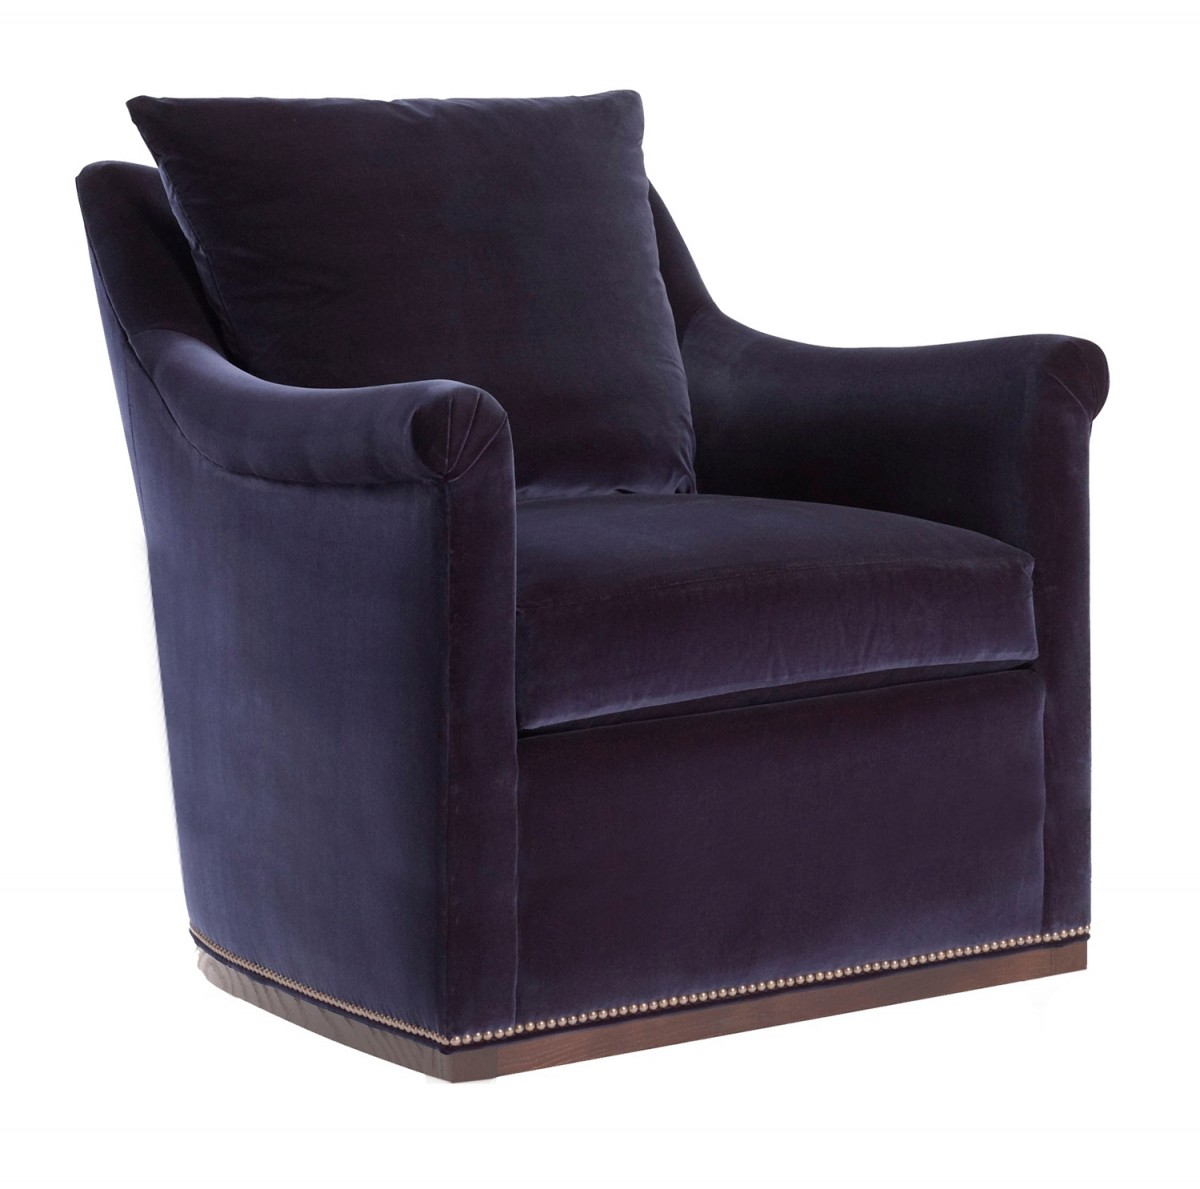 Jules Low Profile Swivel Chair | Highlight image